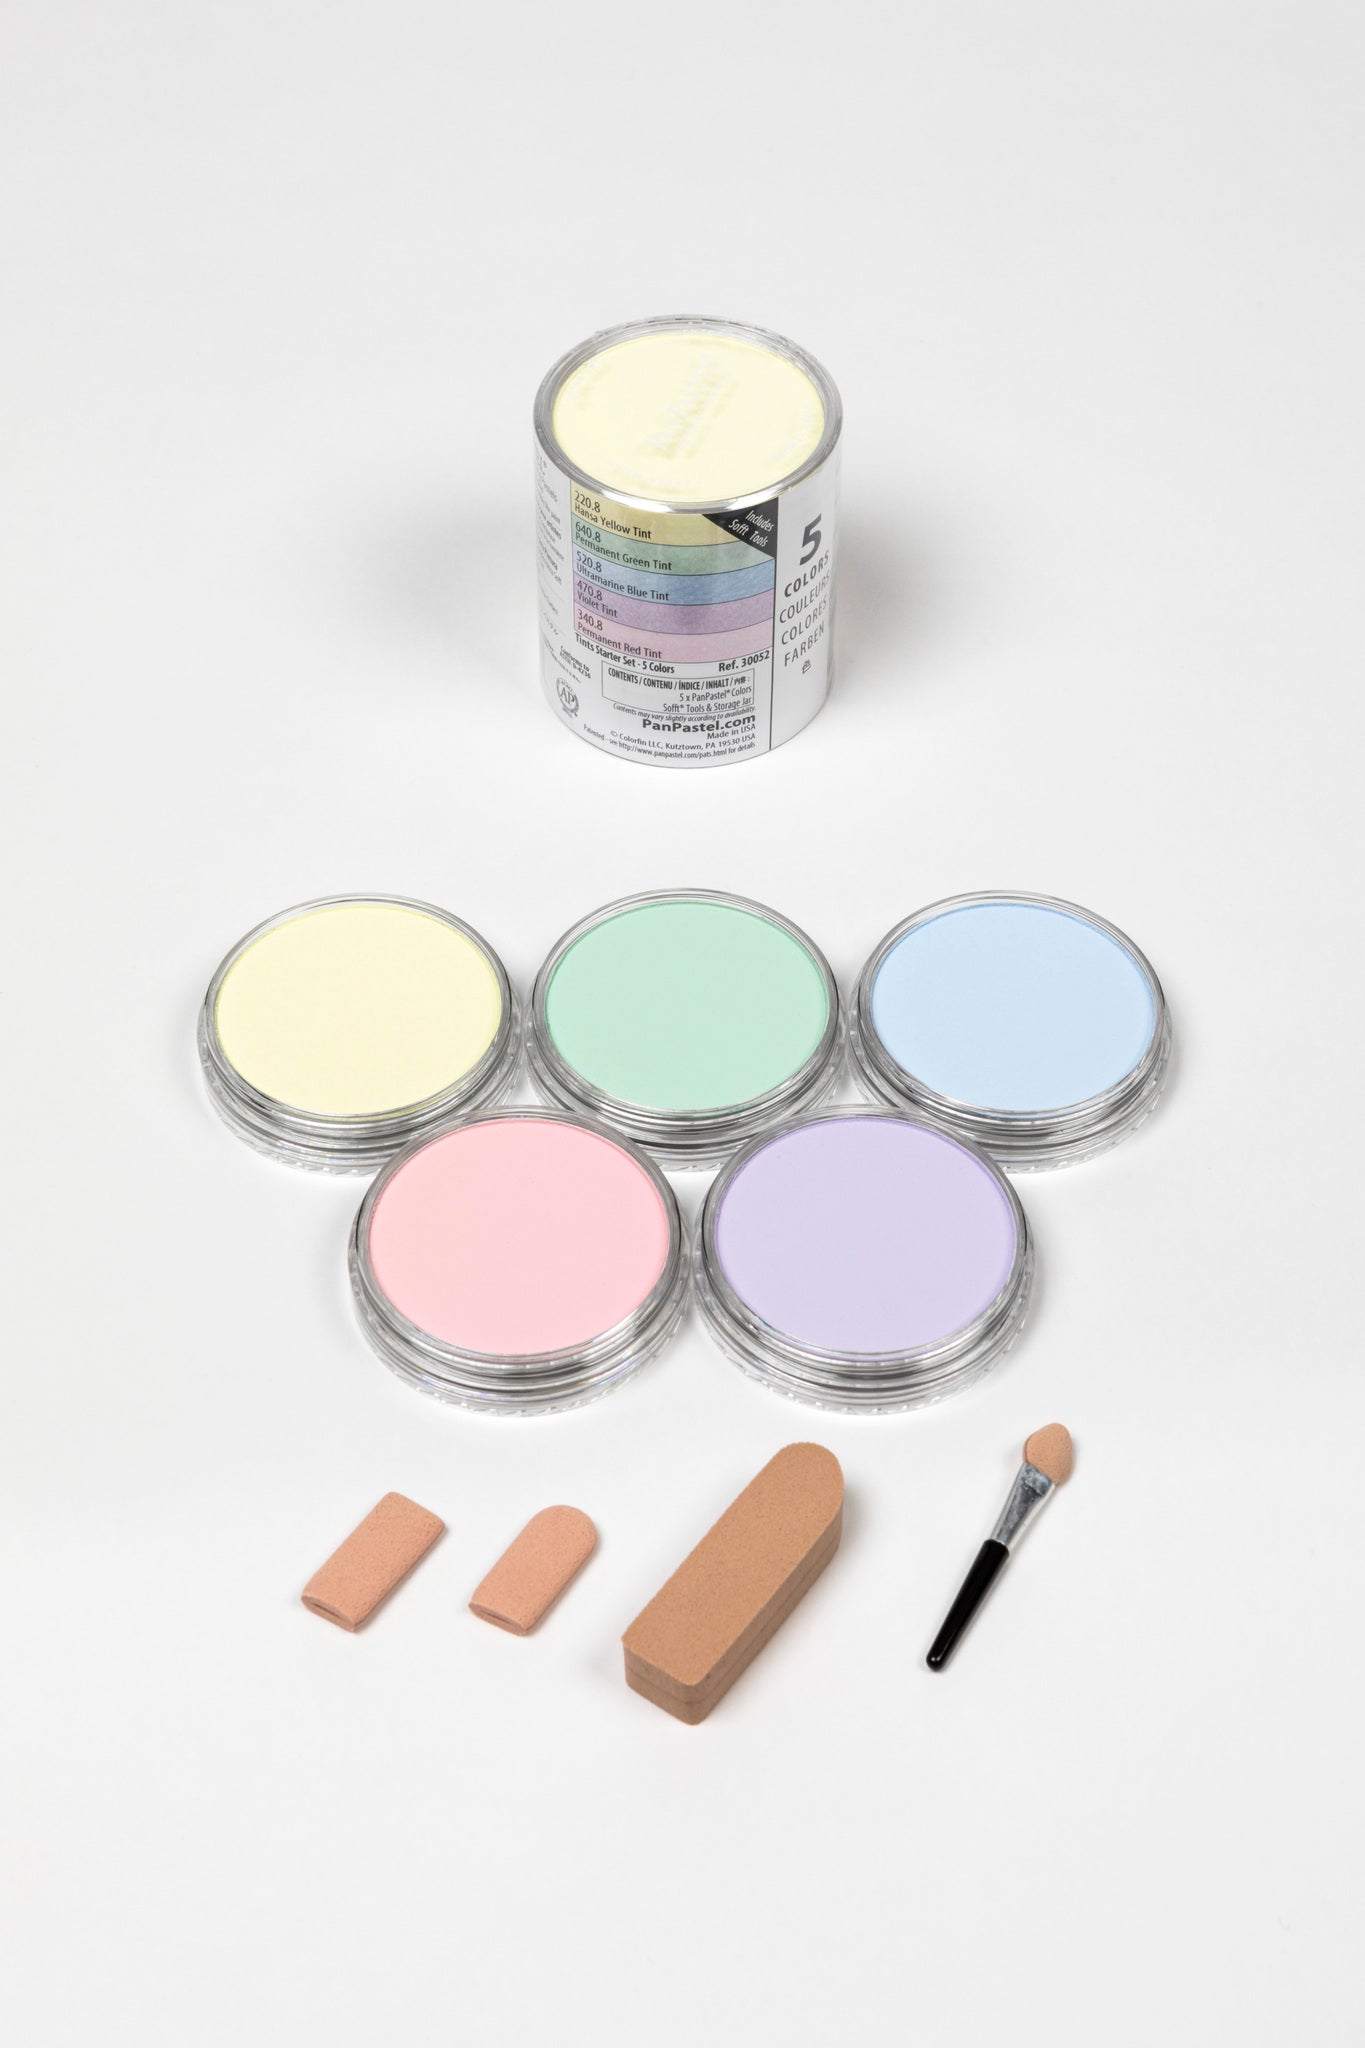 PanPastel 5 Colour Starter Set Tints 30052, soft pastel colours offer a gentle subtle veil of colour. Gorgeous selection of tints with a small selection of application and blending Sofft tools. 